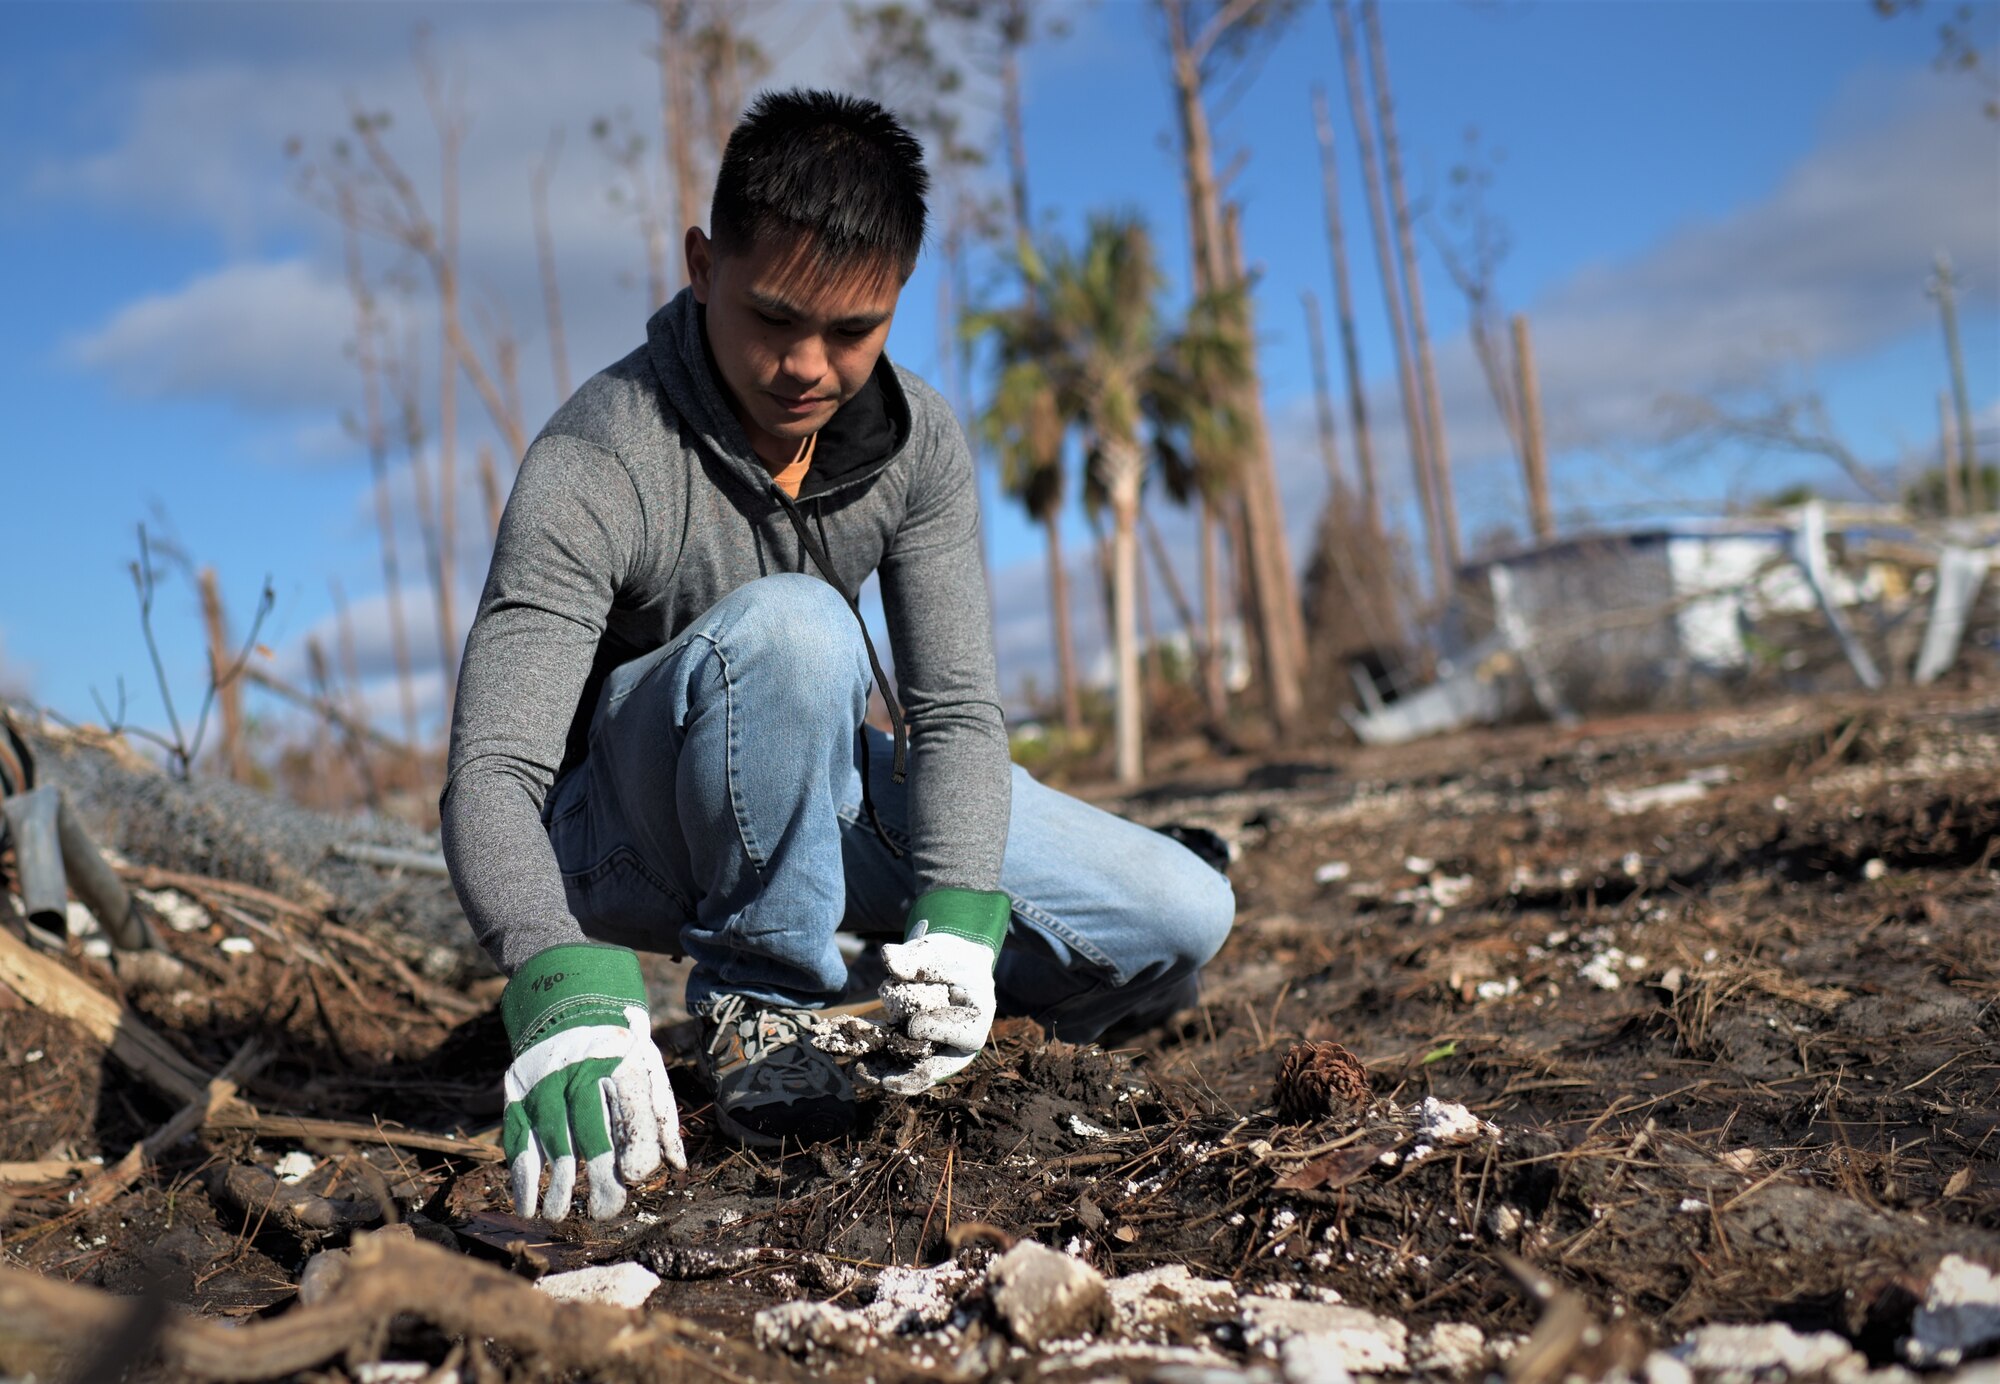 Airman 1st Class Adrian Patting, 325th Force Support Squadron personnellist, clean debris from Under the Palms Park in Mexico Beach, Fla., Dec. 16, 2018. Thirty nine volunteers from Tyndall and Eglin Air Force Bases came together to help clean Mexico Beach, one of the communities hit the hardest by Hurricane Michael.  The volunteers were able to clean up more than 40 cubic yards of debris within four hours. (U.S. Air Force photo by Tech. Sgt. Sara Keller)